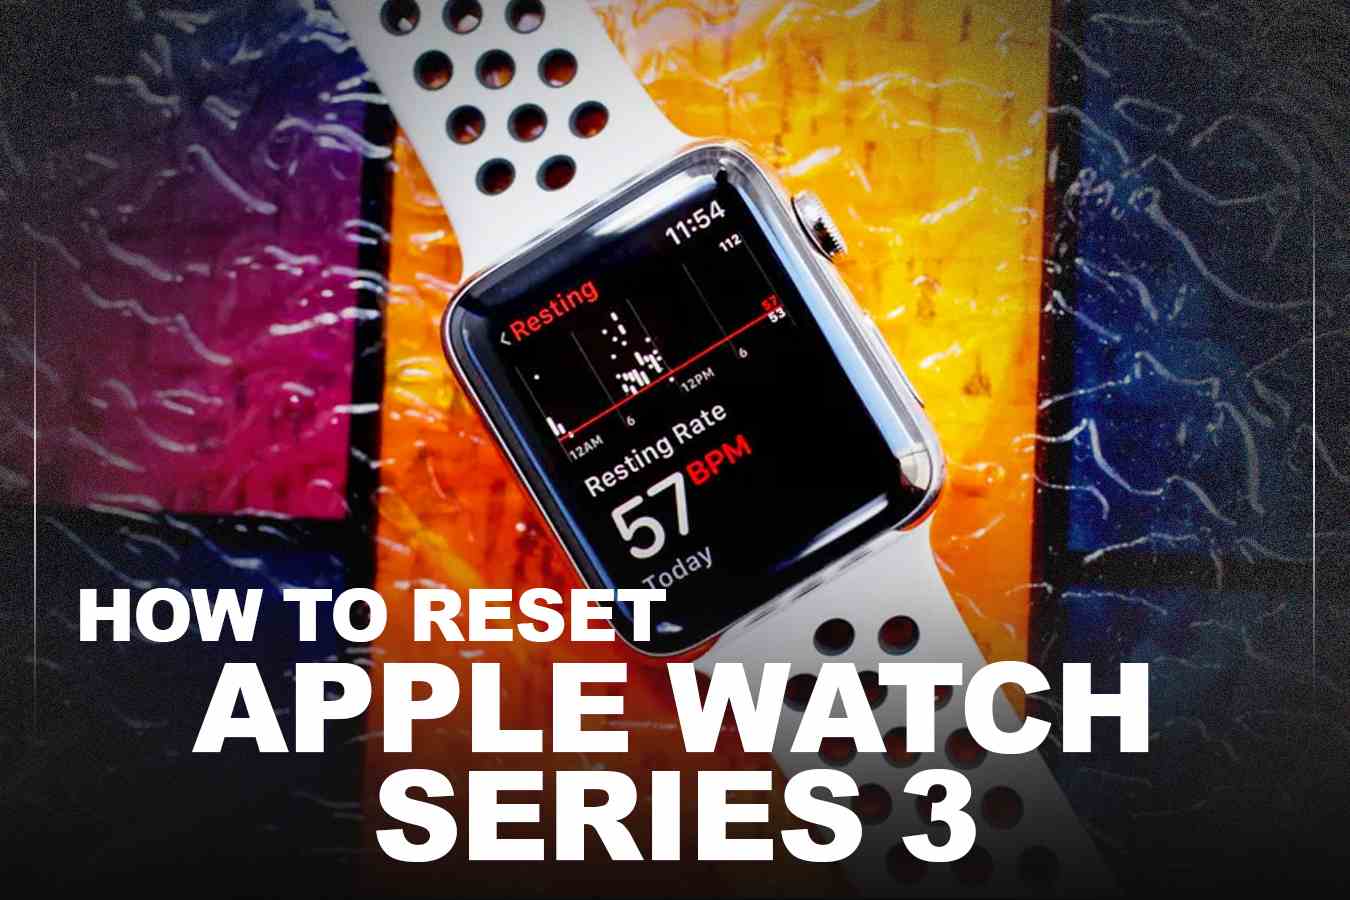 How to Reset Apple Watch Series 3